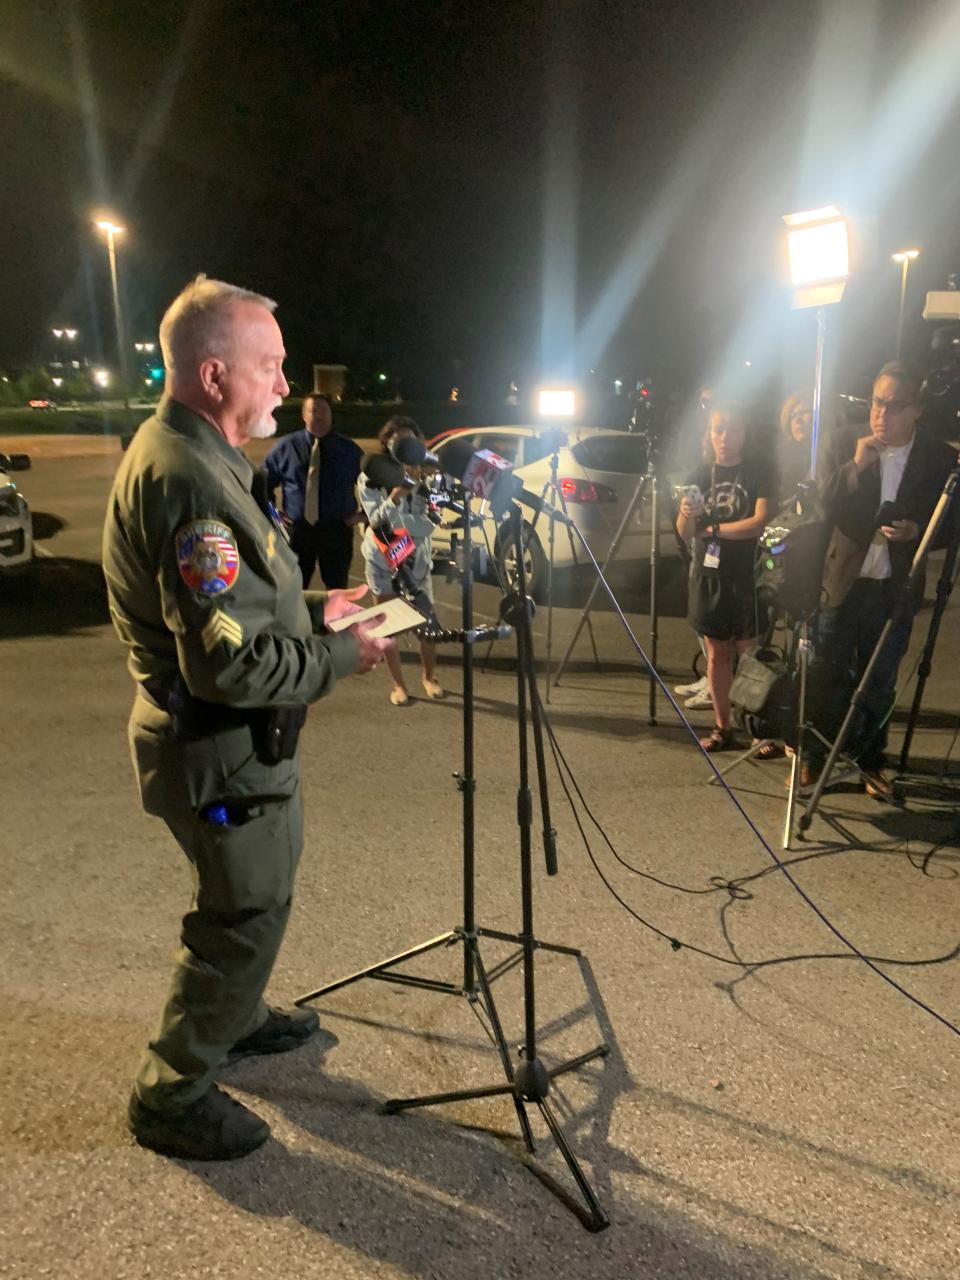 Rutherford County Sheriff's Office Sgt. Dan Goodwin reads a statement during a media conference on Wednesday evening after a shooting on the Middle Tennessee State University campus left one dead.